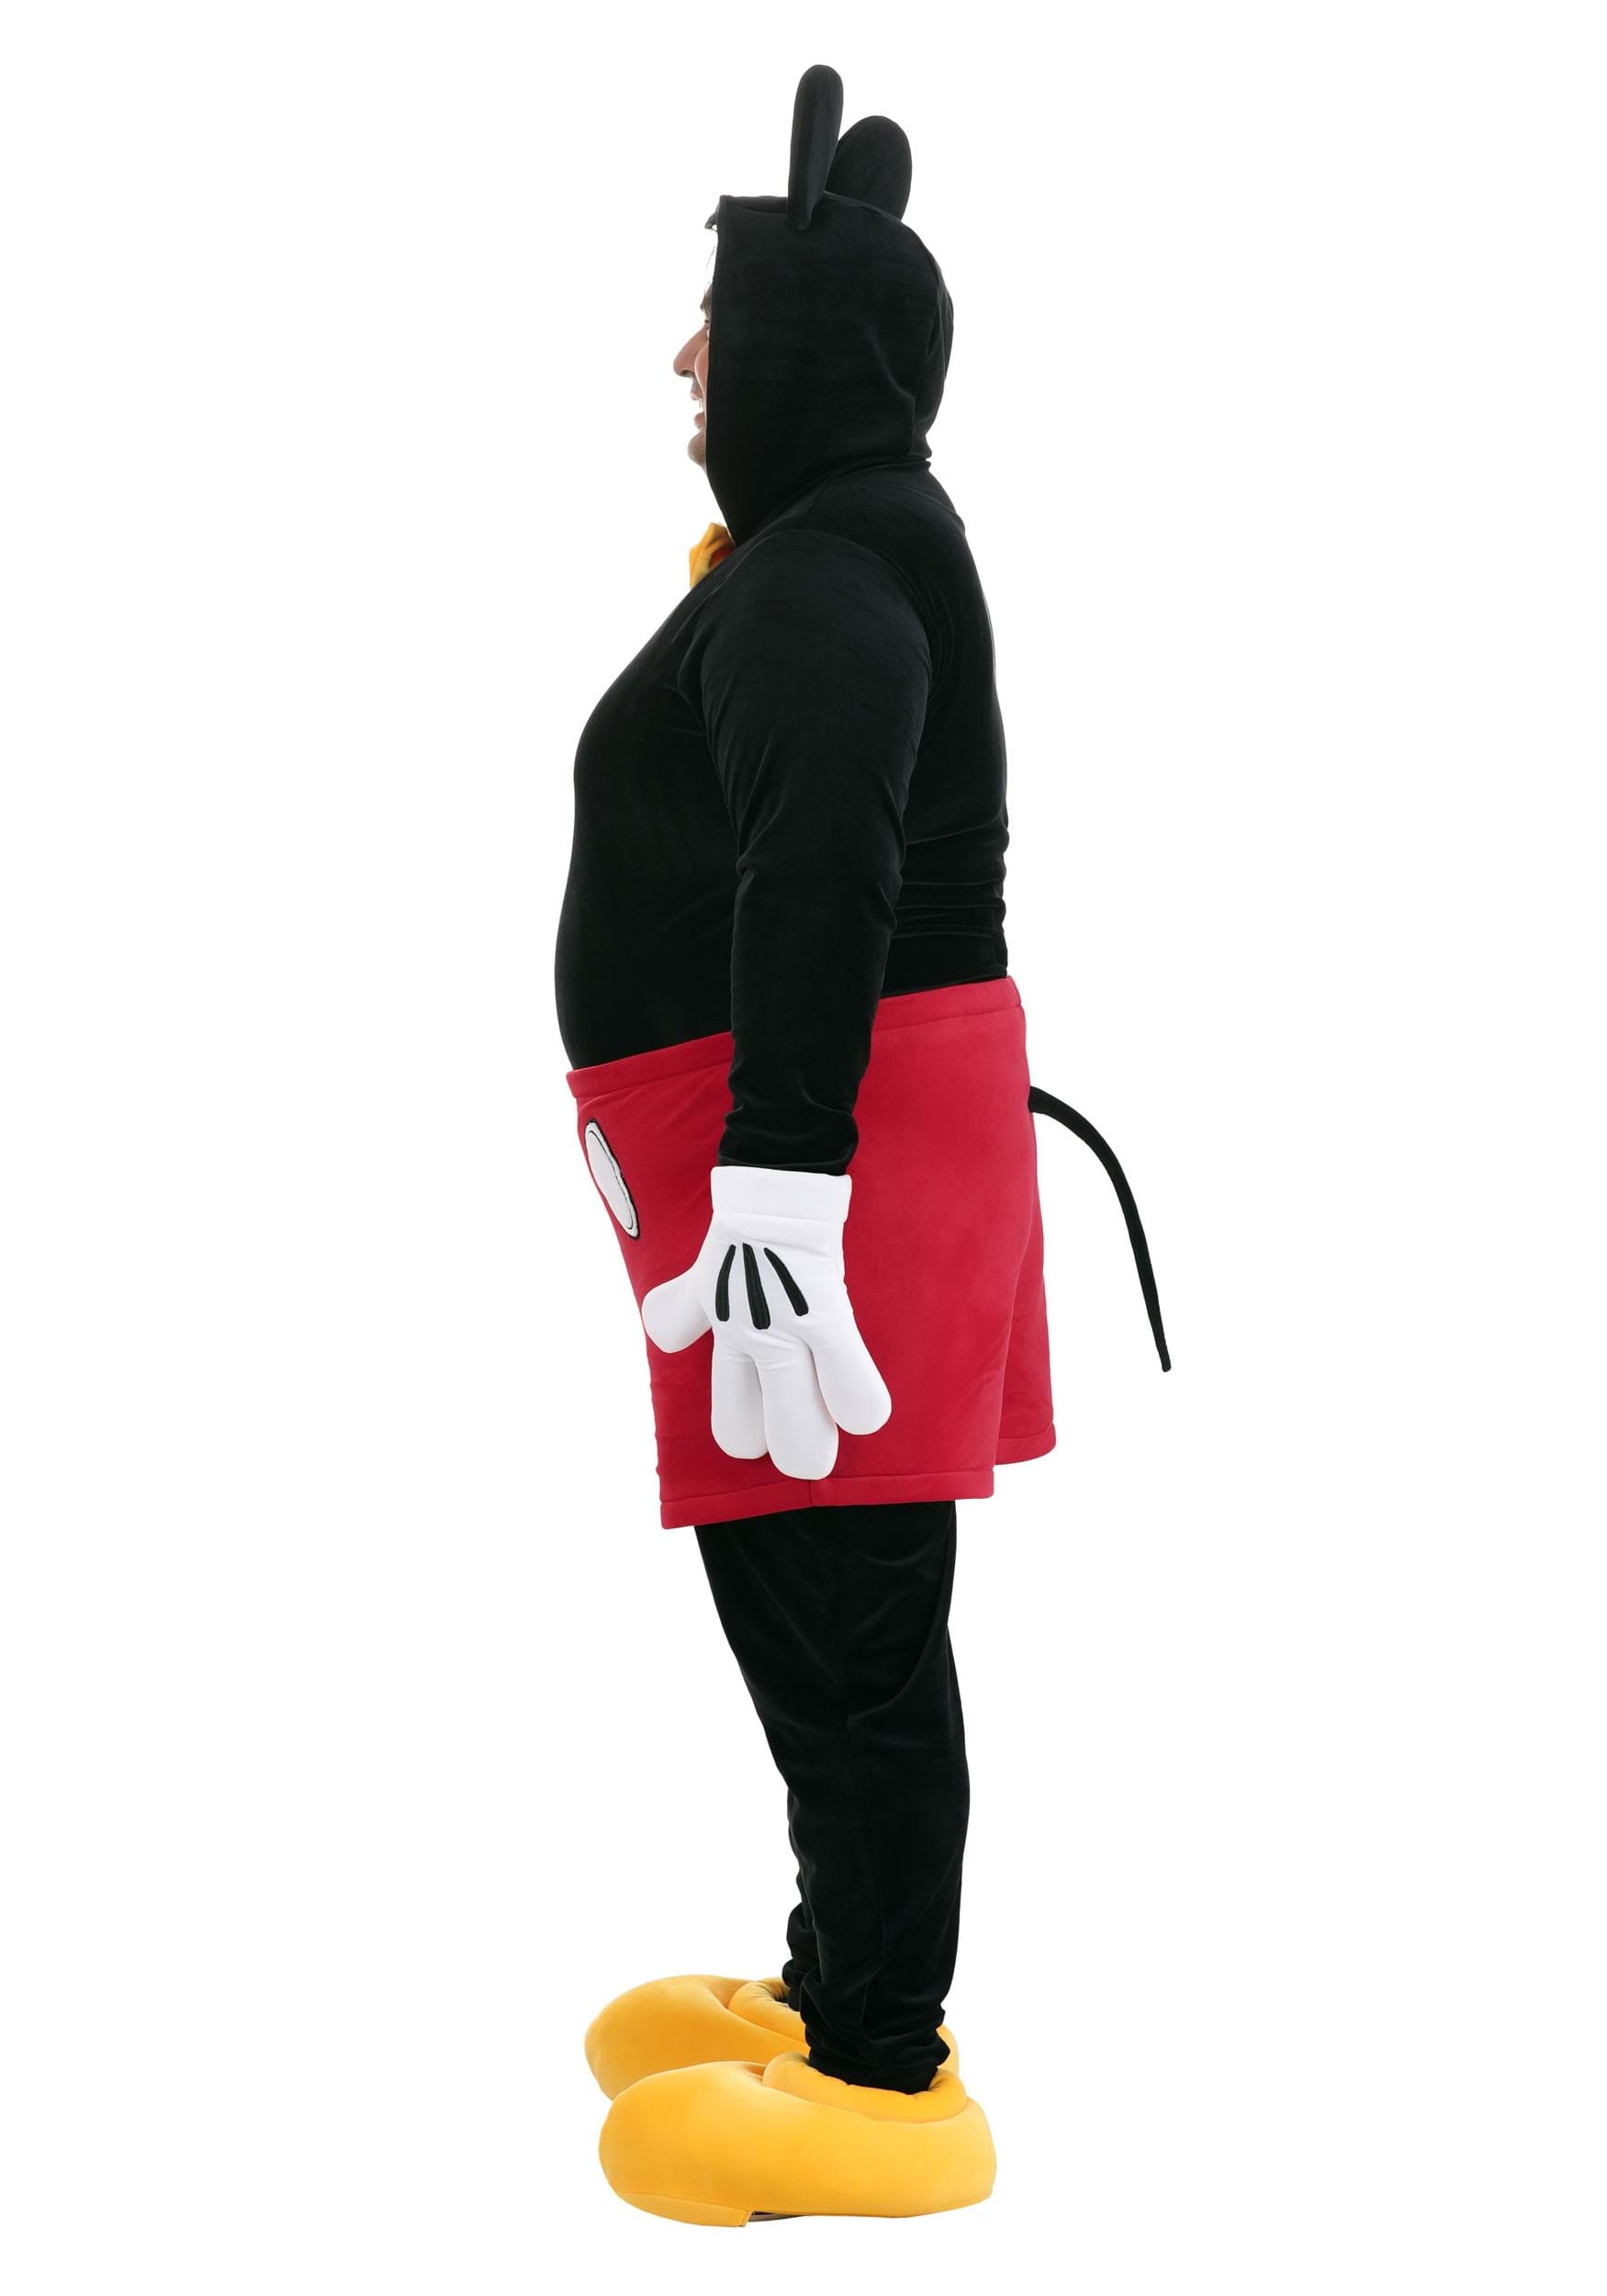 Plus Size Disney Deluxe Mickey Mouse Costume for Adults